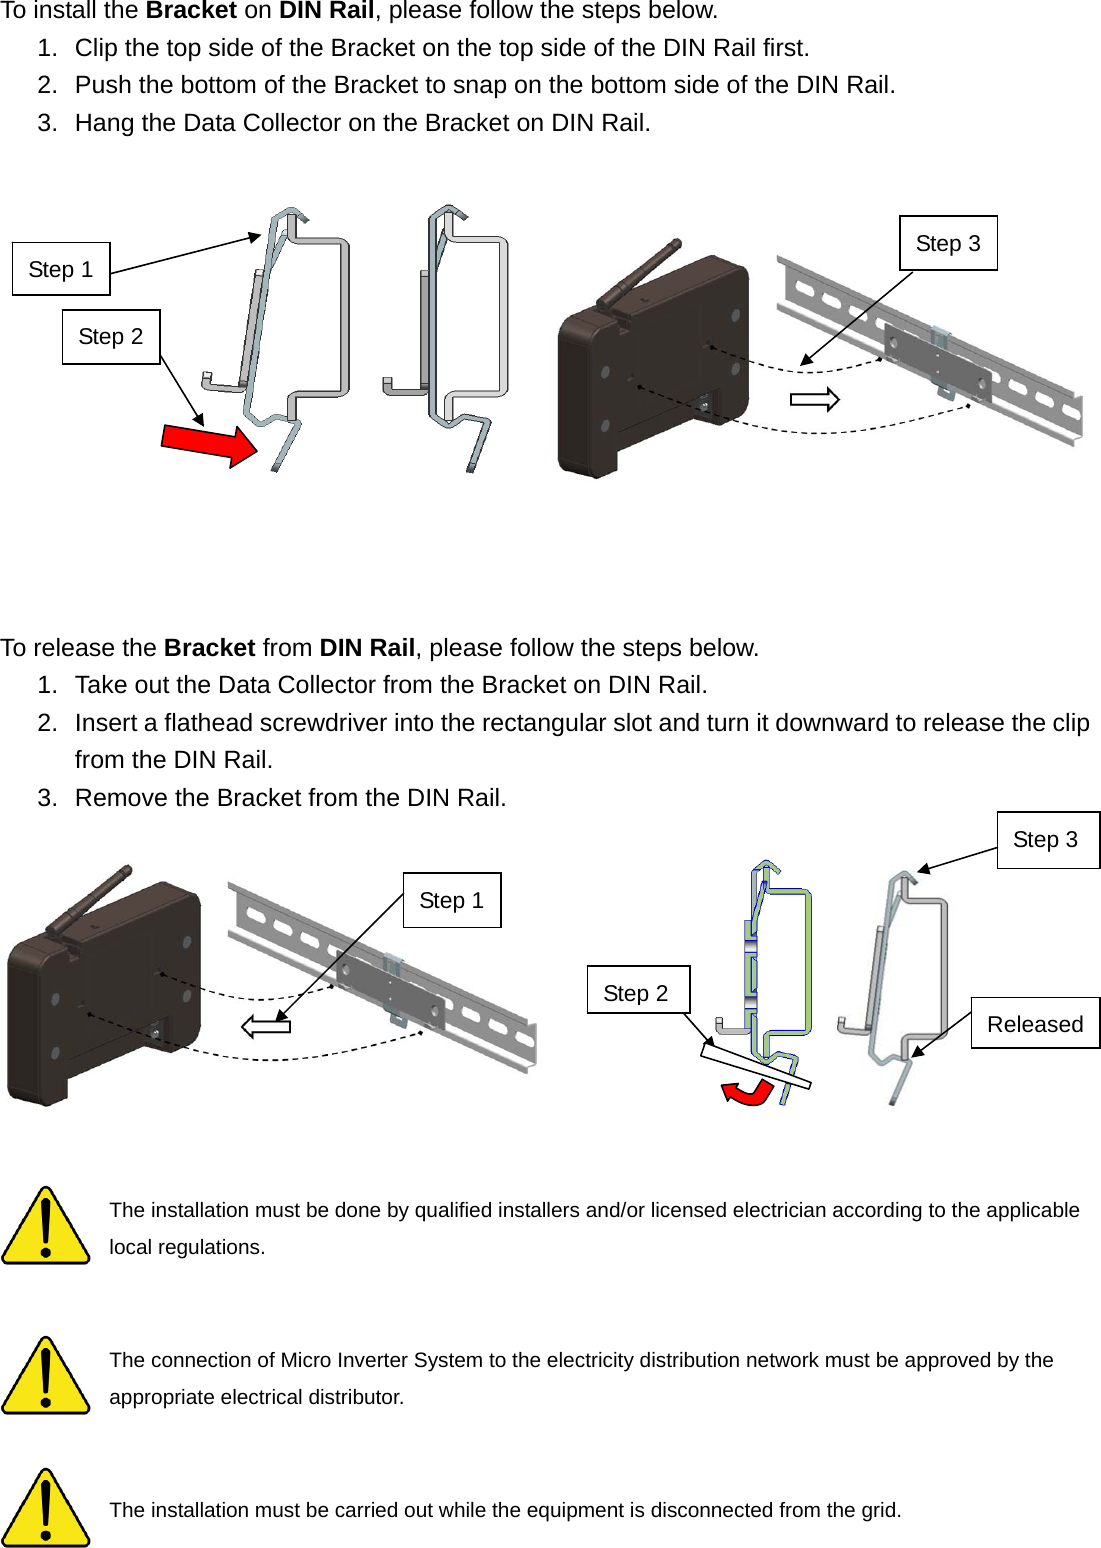 To install the Bracket on DIN Rail, please follow the steps below. 1.  Clip the top side of the Bracket on the top side of the DIN Rail first. 2.  Push the bottom of the Bracket to snap on the bottom side of the DIN Rail. 3.  Hang the Data Collector on the Bracket on DIN Rail.              To release the Bracket from DIN Rail, please follow the steps below. 1.  Take out the Data Collector from the Bracket on DIN Rail. 2.  Insert a flathead screwdriver into the rectangular slot and turn it downward to release the clip from the DIN Rail. 3.  Remove the Bracket from the DIN Rail.     The installation must be done by qualified installers and/or licensed electrician according to the applicable local regulations.   The connection of Micro Inverter System to the electricity distribution network must be approved by the appropriate electrical distributor.   The installation must be carried out while the equipment is disconnected from the grid. Step 3 ReleasedStep 1StepStep 3Step 1 Step 2 Step 2